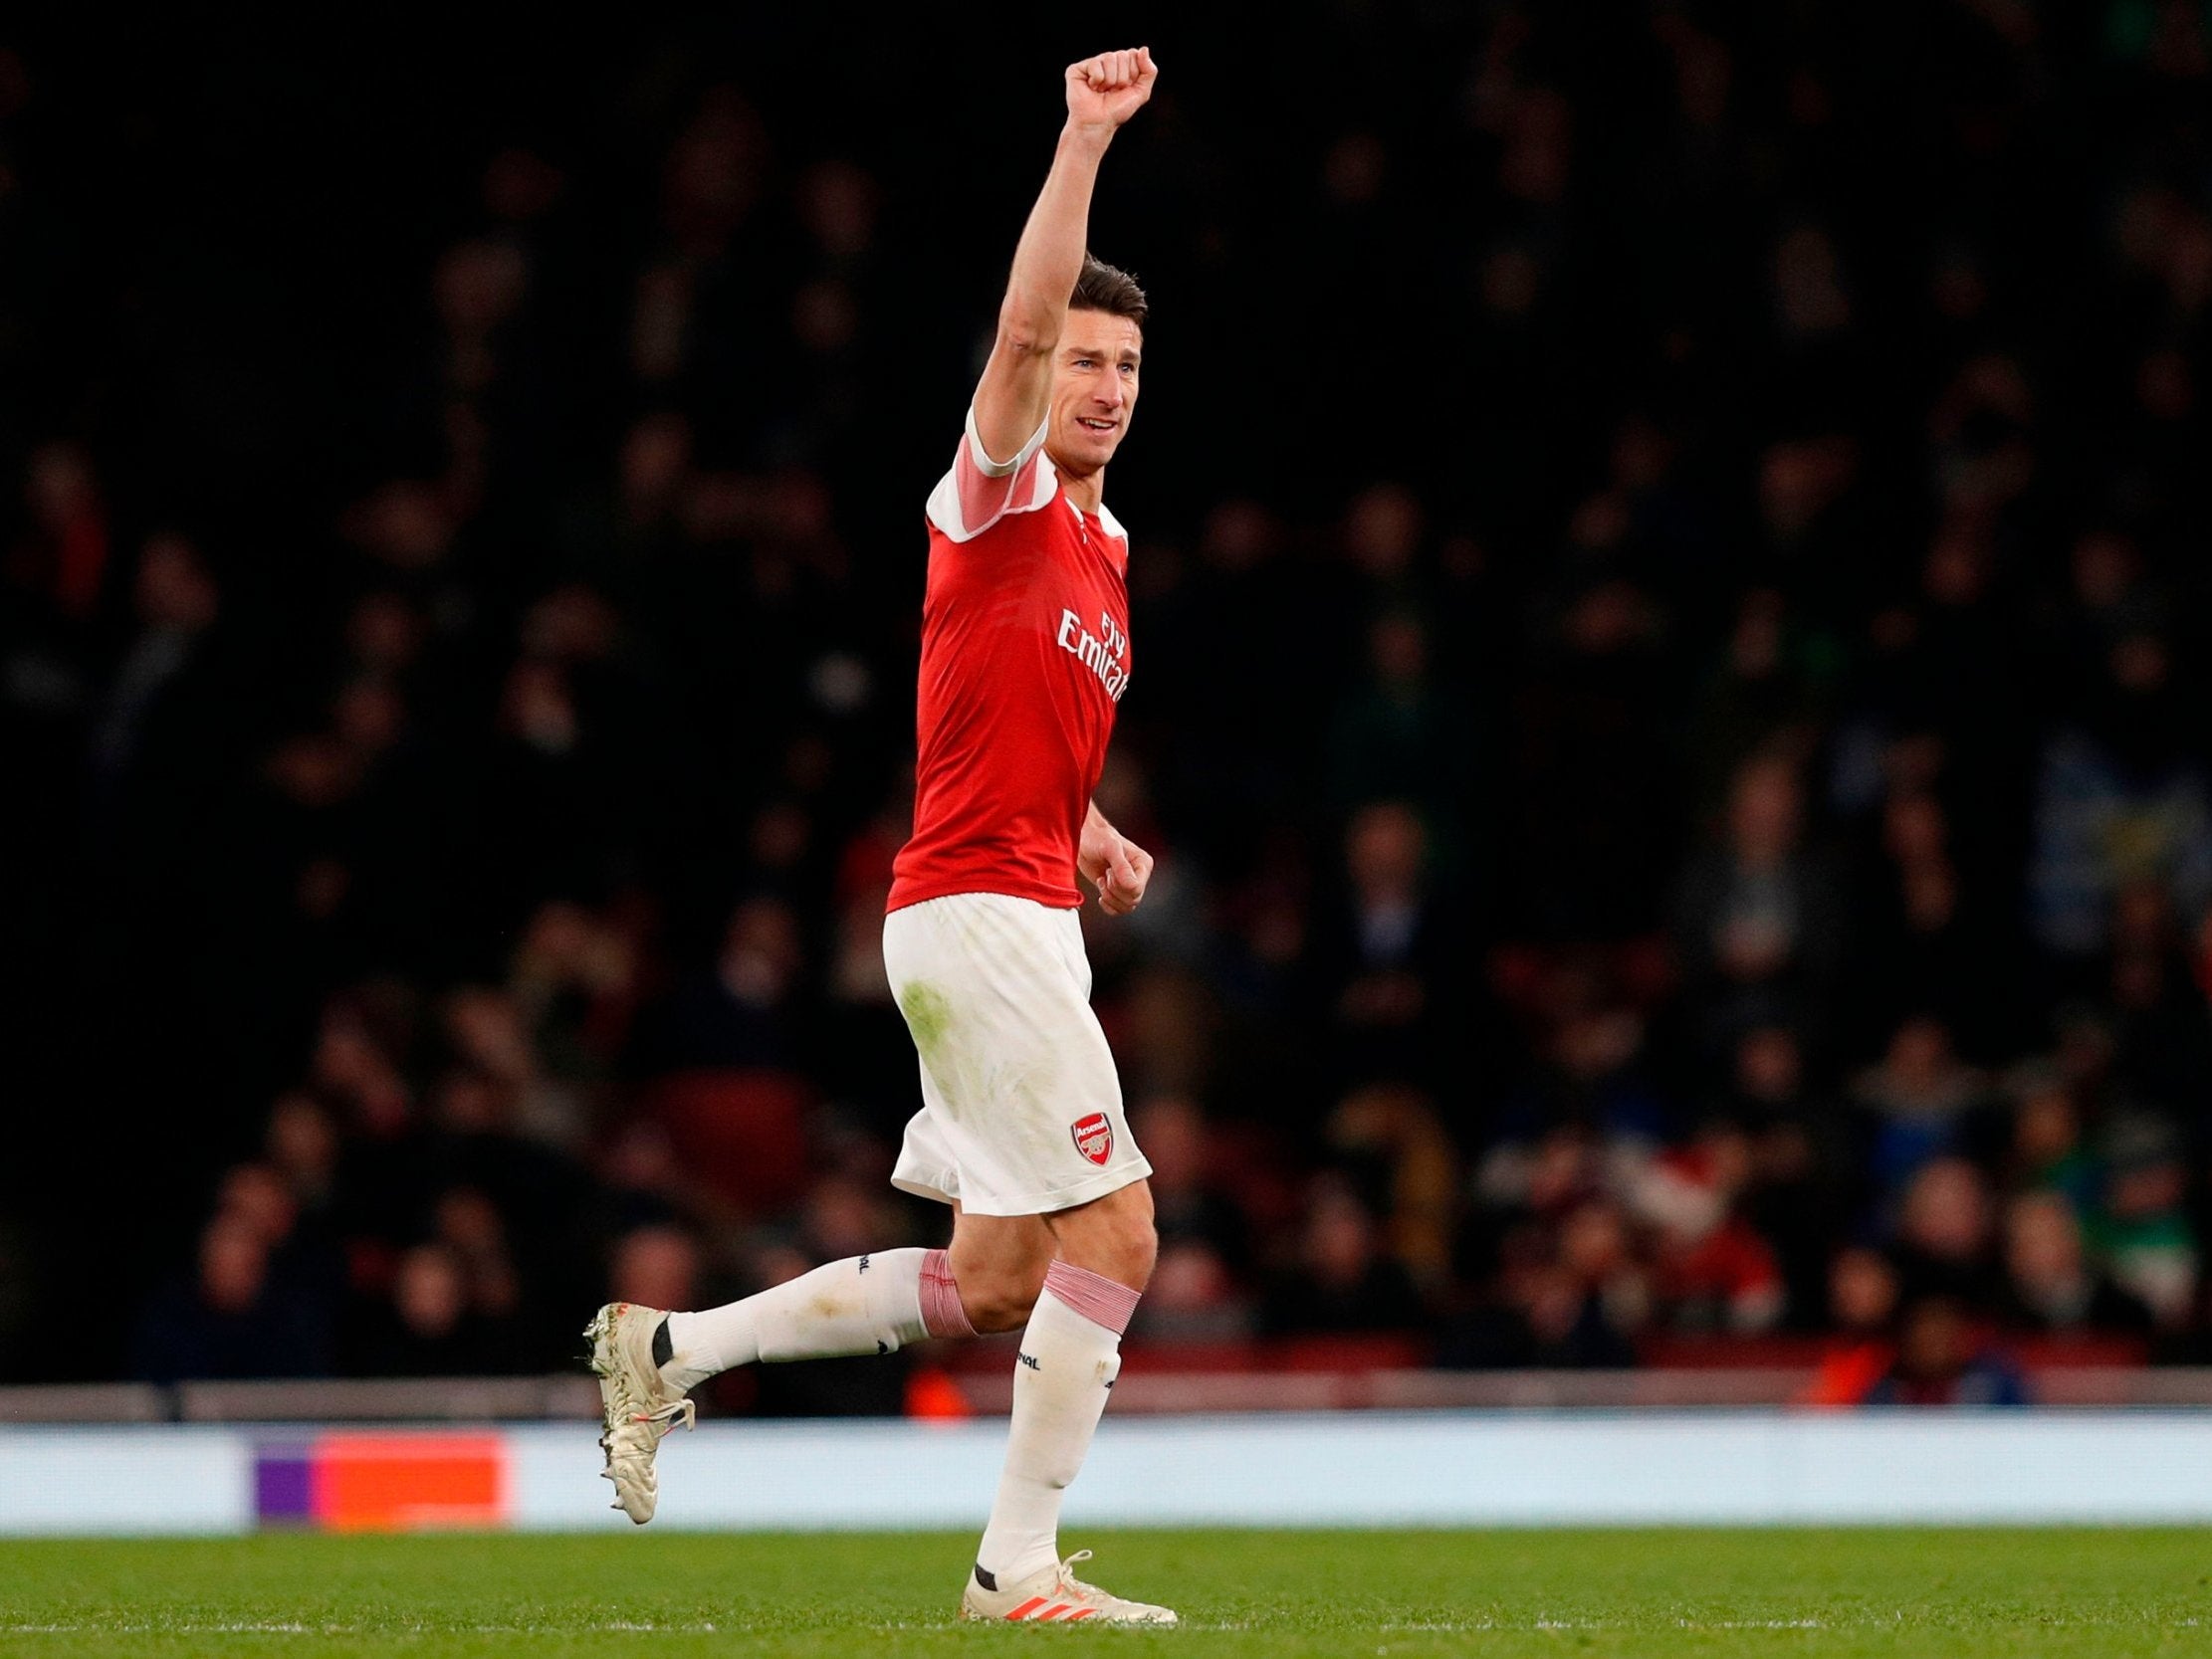 Laurent Koscielny made his first appearance since May